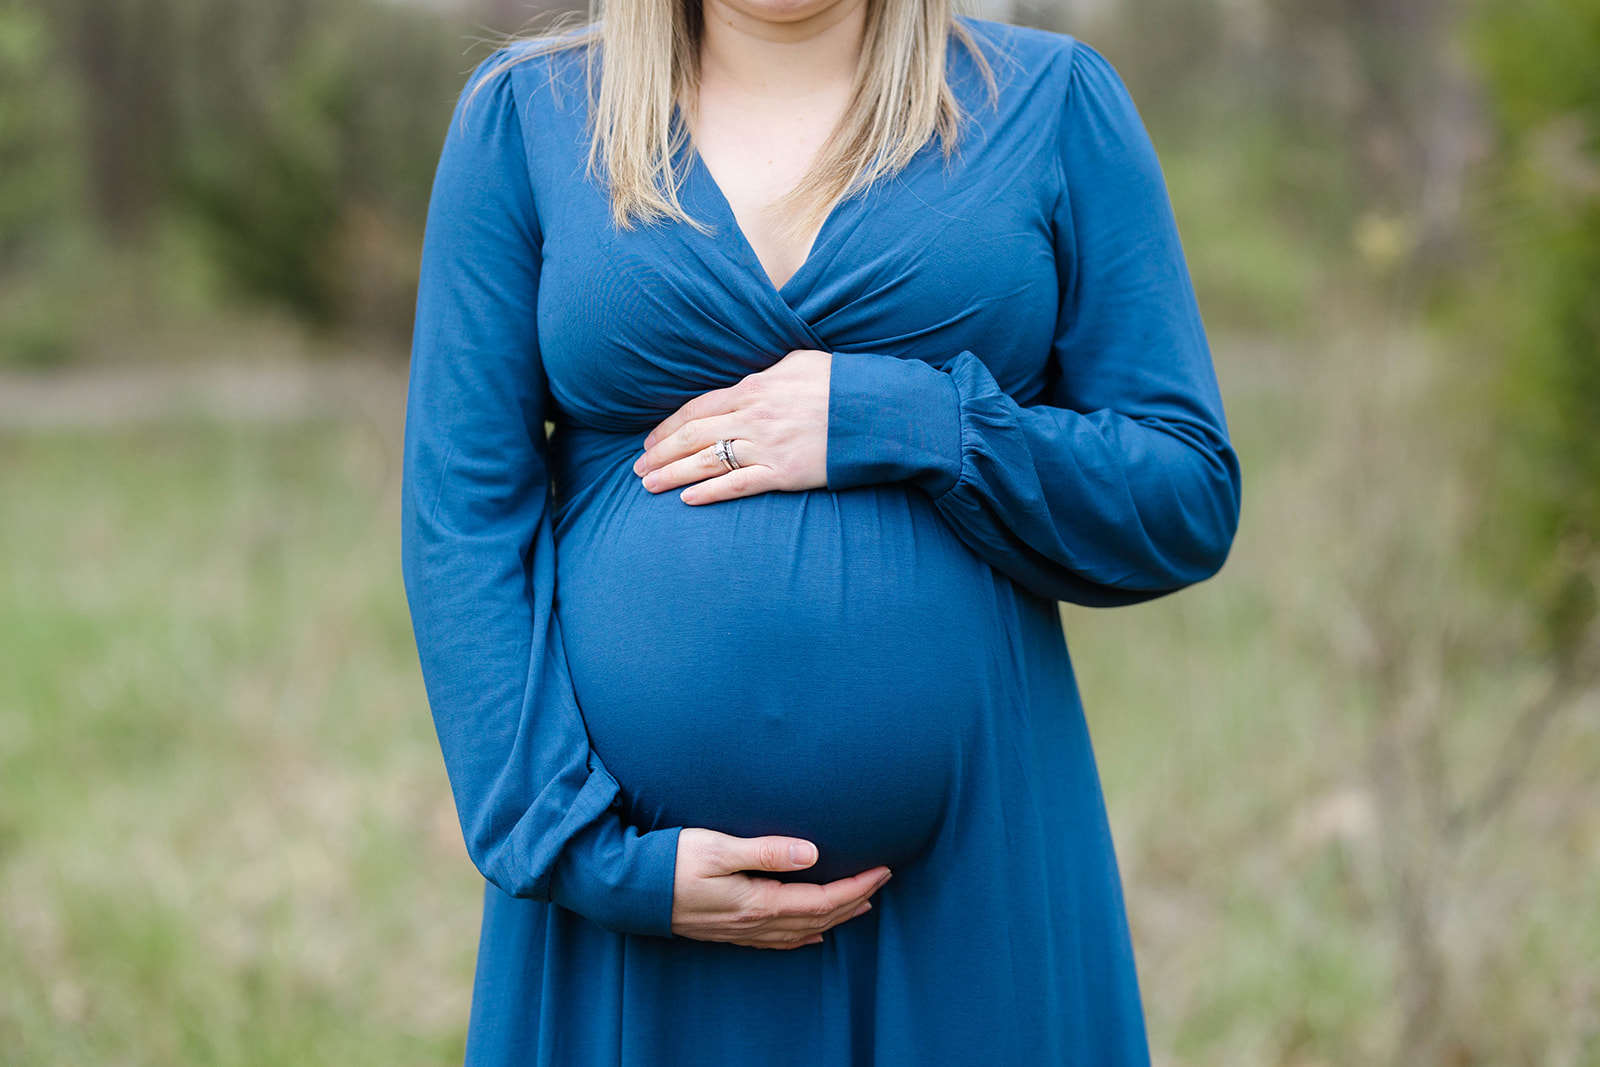 Details of a mom to be holding her bump in a blue maternity dress